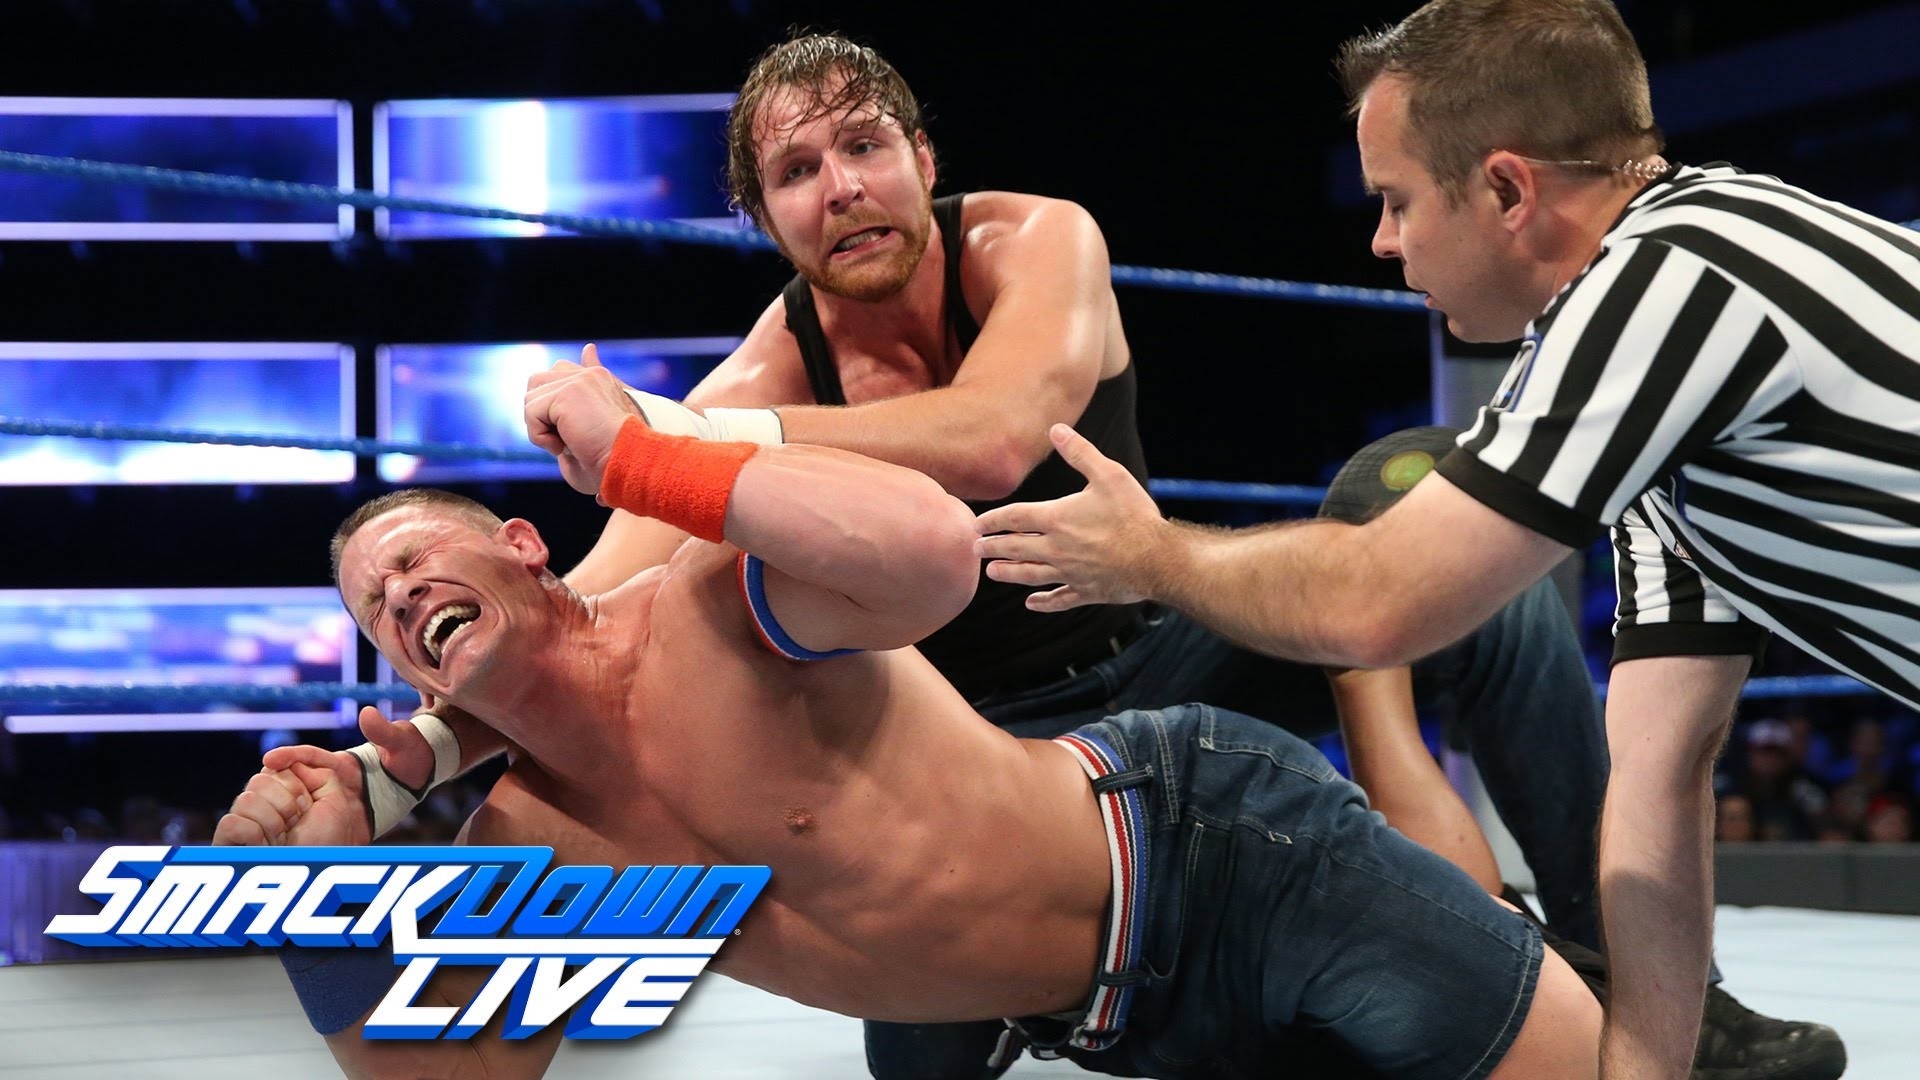 SmackDown showdown, High-energy matches, WWE superstars, Exciting clashes, 1920x1080 Full HD Desktop